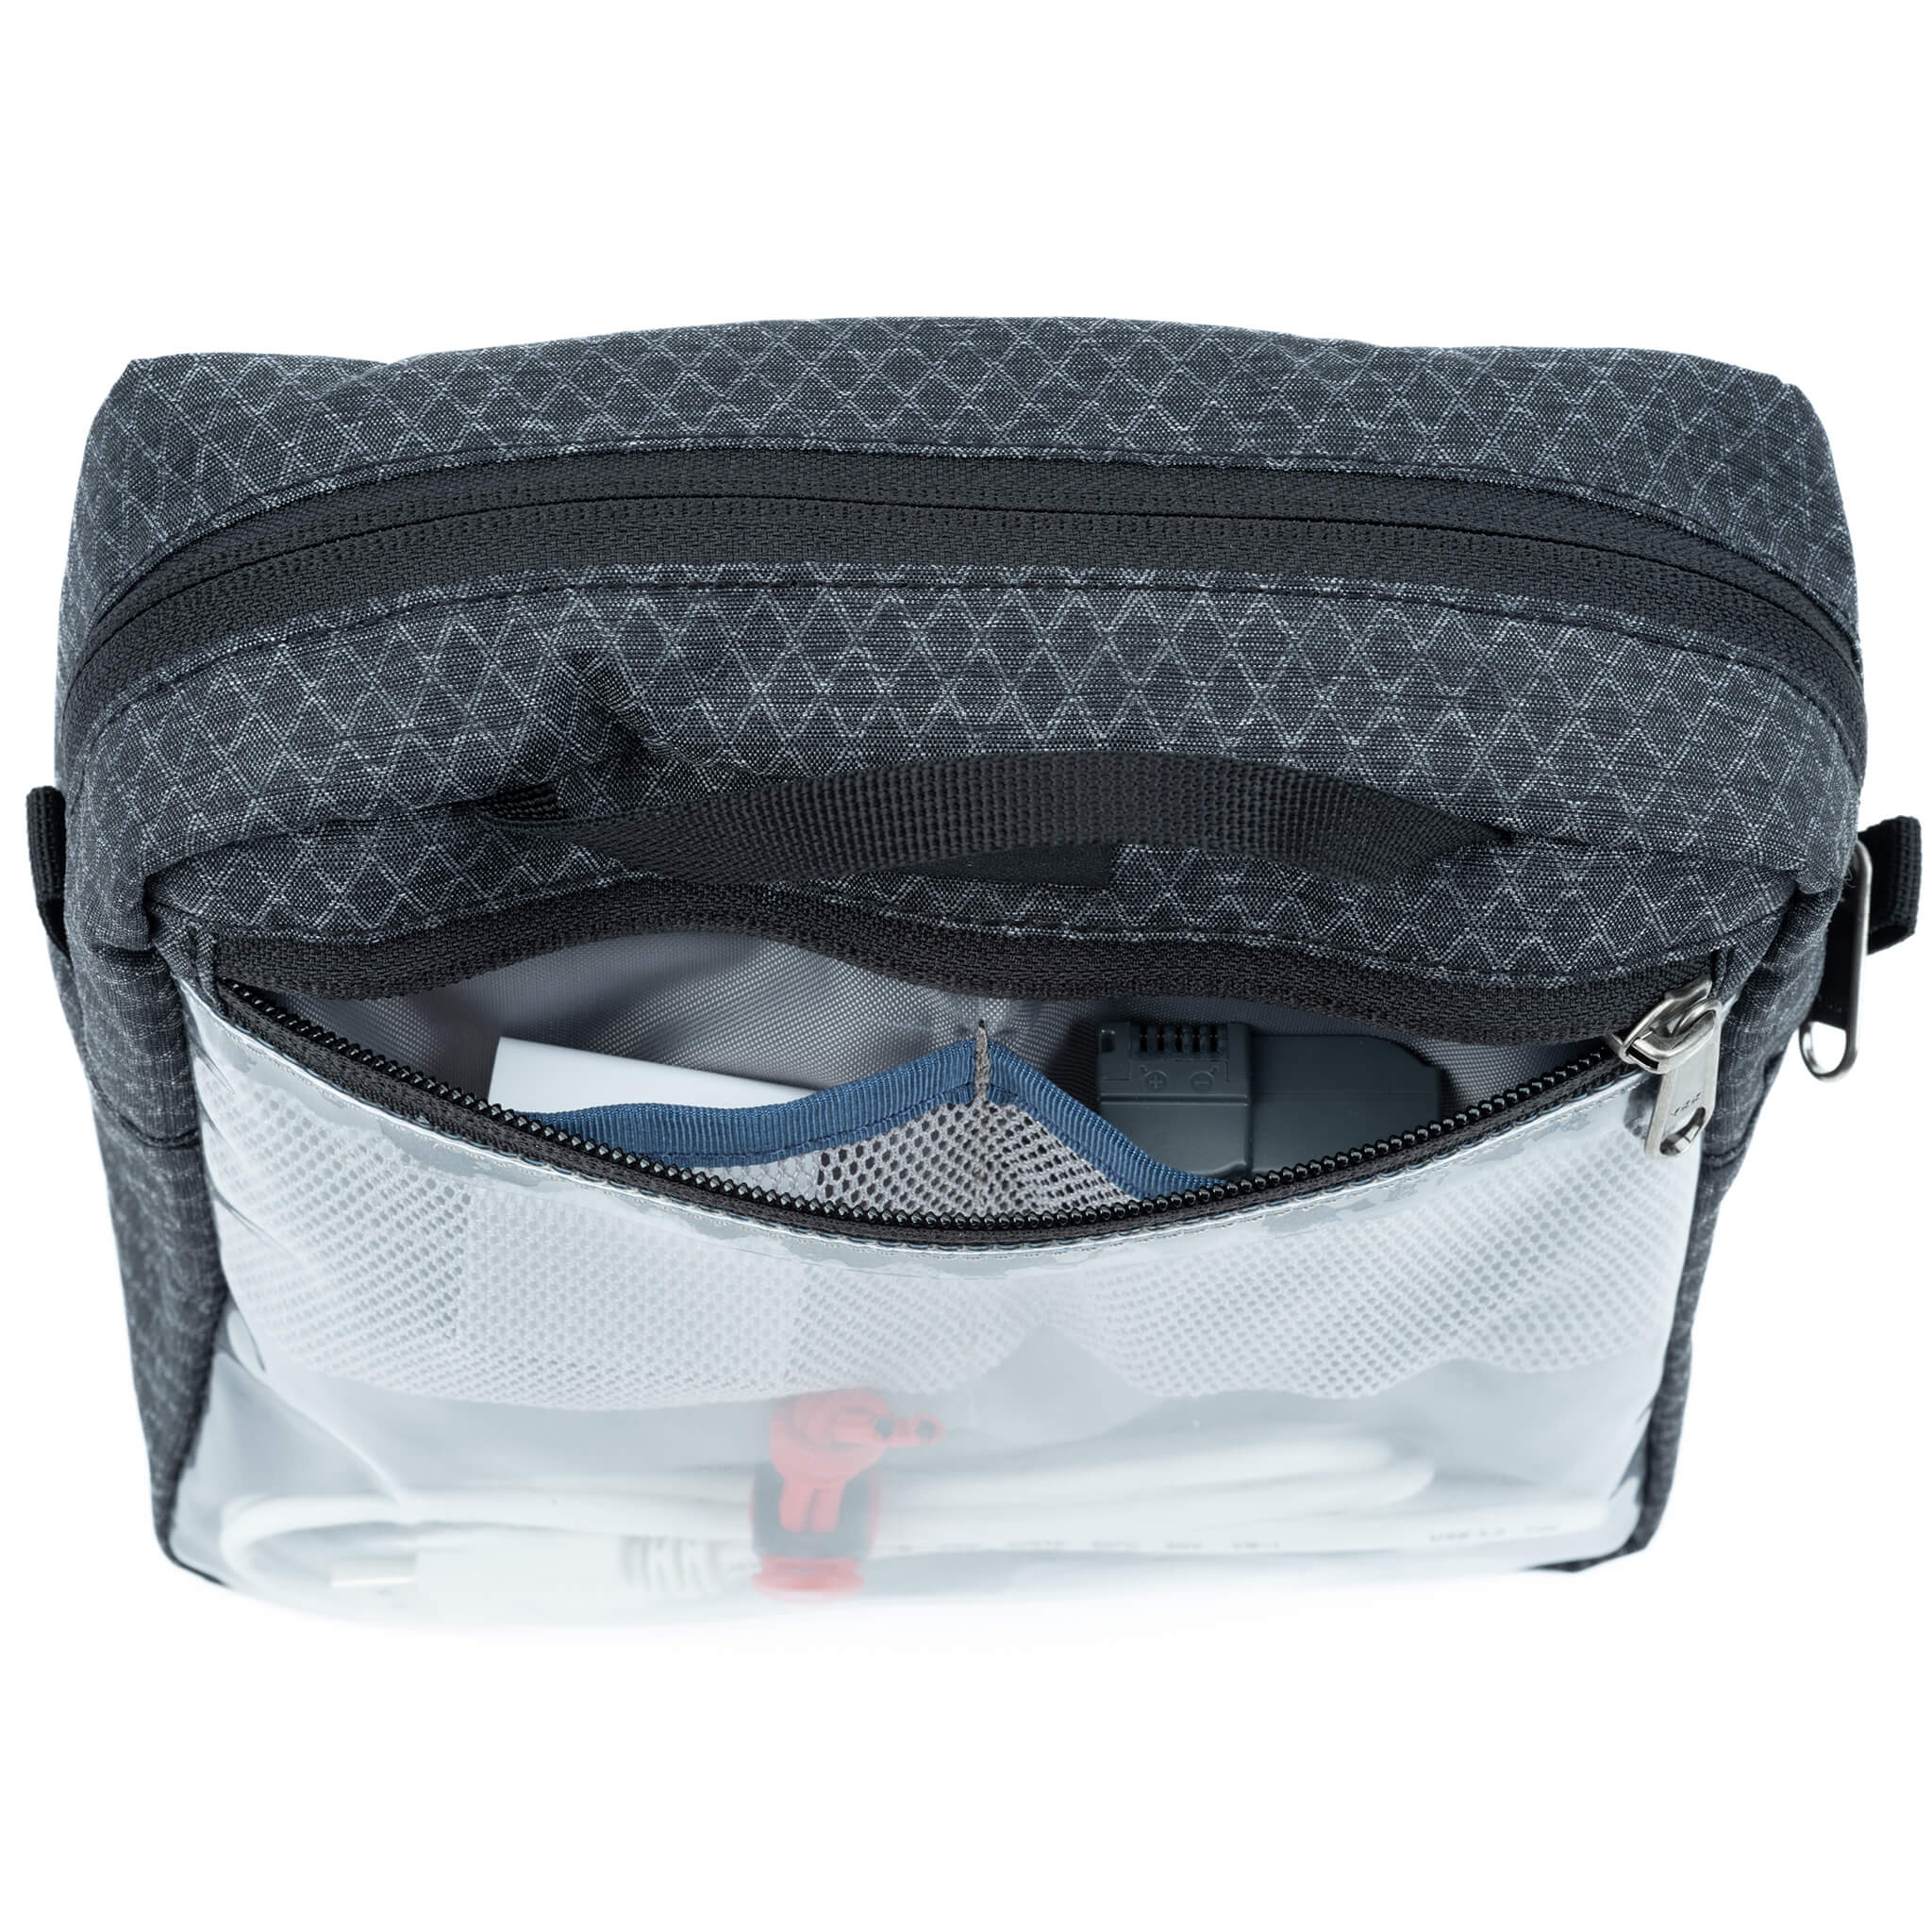 Back pocket includes mesh organizer slots for small items